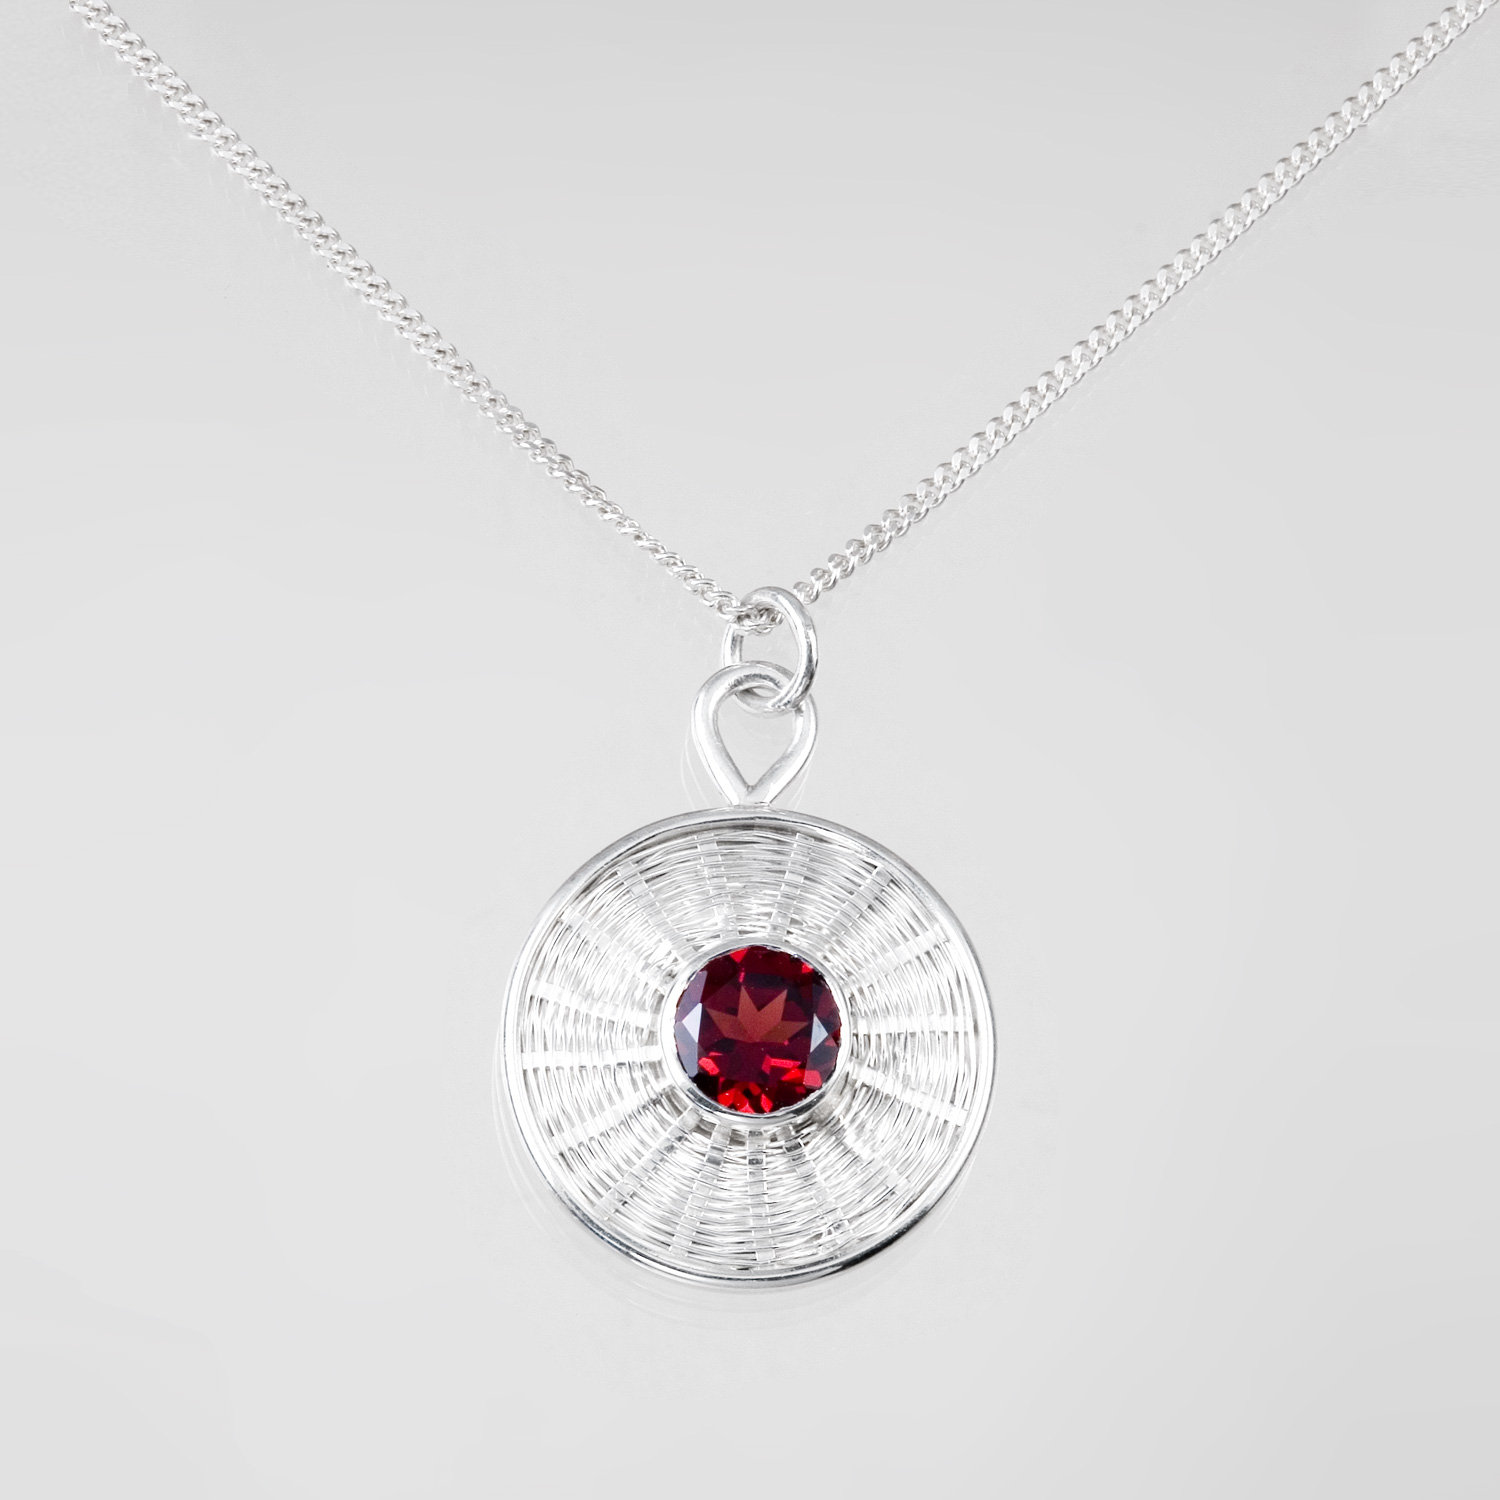 Almadine Garnet Pendant in sterling and fine silver by Tamberlaine